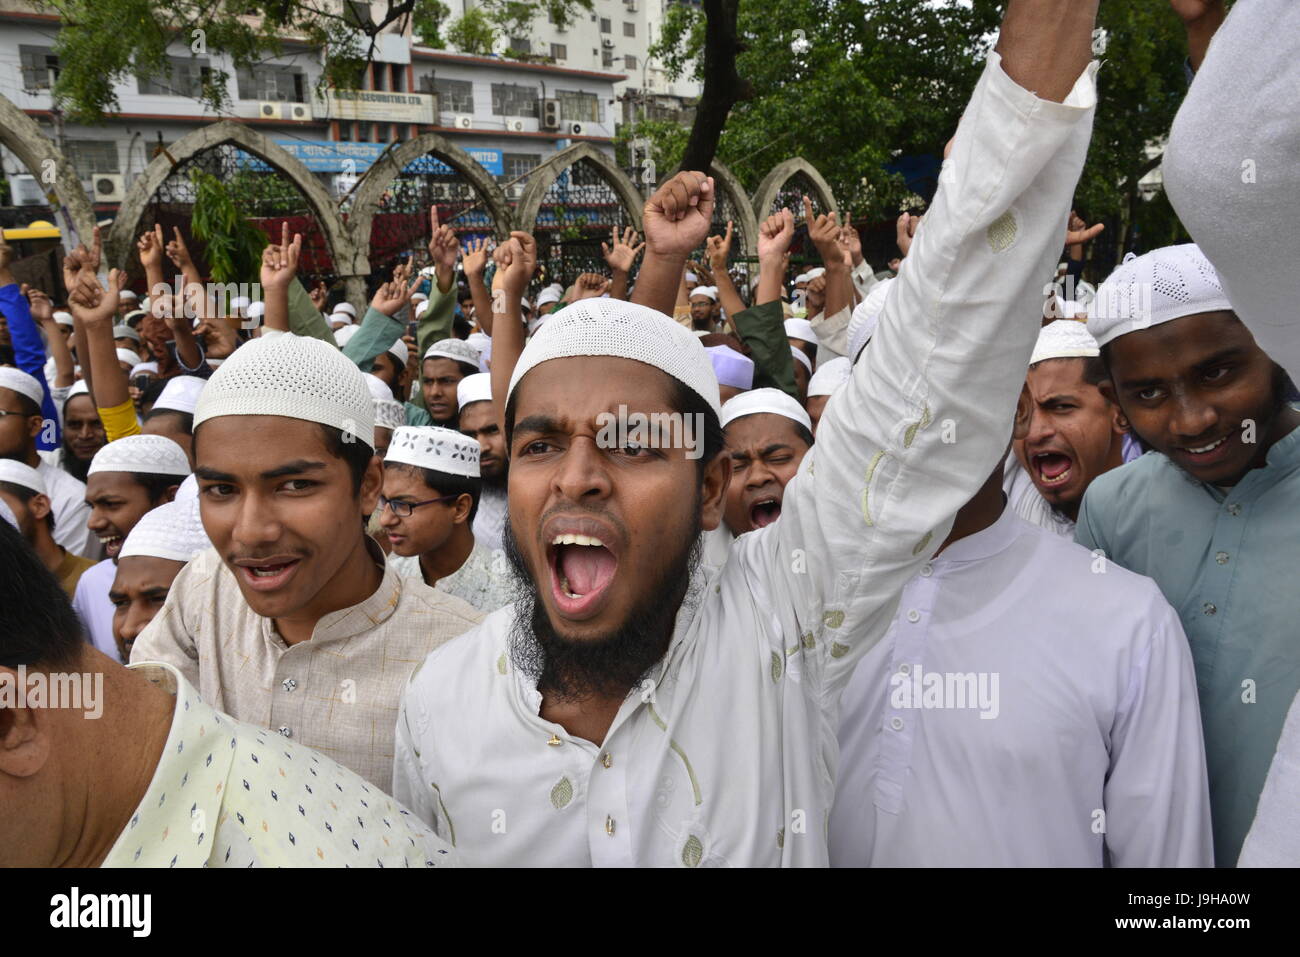 Dhaka, Bangladesh. 2nd June, 2017. 'Hefajote Islam Bangladesh' activities held a protest rally against a Lady Justice statue reinstalled on the premises of the Supreme Court in Dhaka, Bangladesh, on June 02, 2017. Bangladesh on May 28 reinstalled a controversial statue deemed un-Islamic by religious hardliners on the grounds of the Supreme Court just days after its removal had sparked angry protests by secular groups. Credit: Mamunur Rashid/Alamy Live News Stock Photo